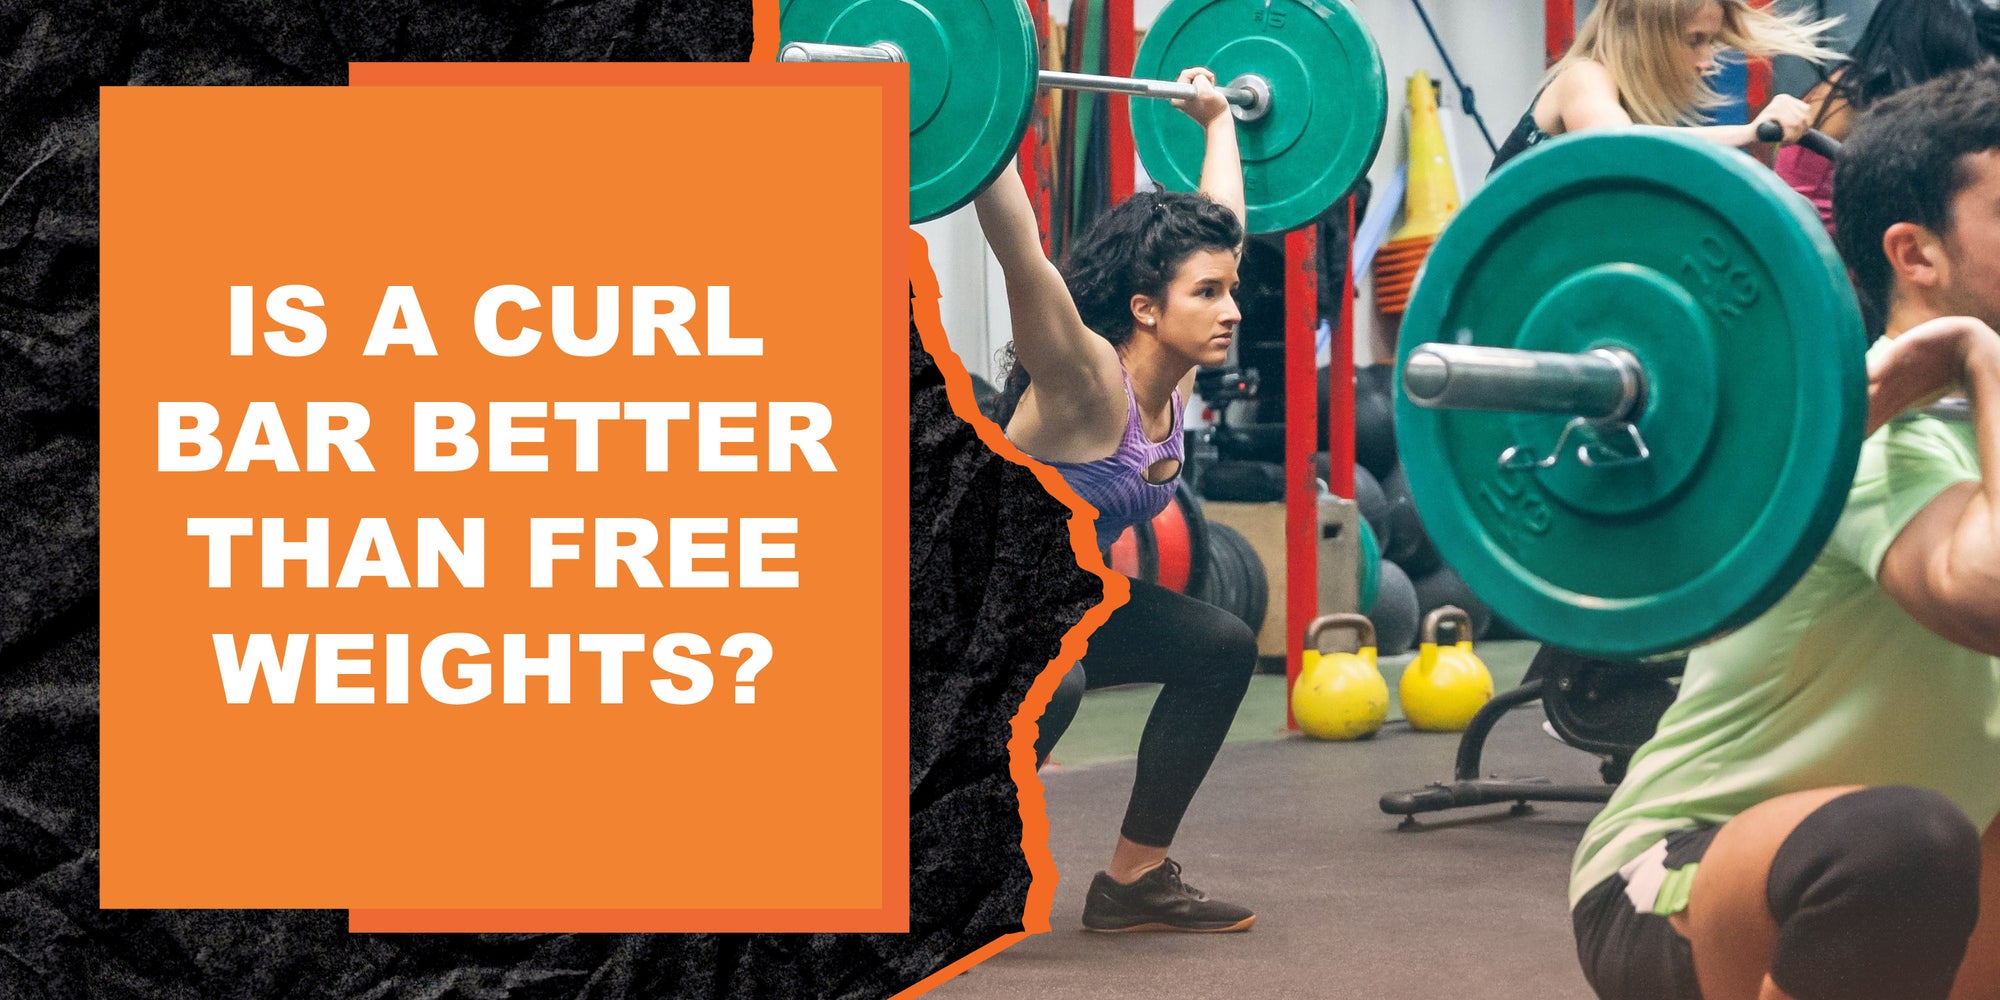 Is a Curl Bar Better than Free Weights?